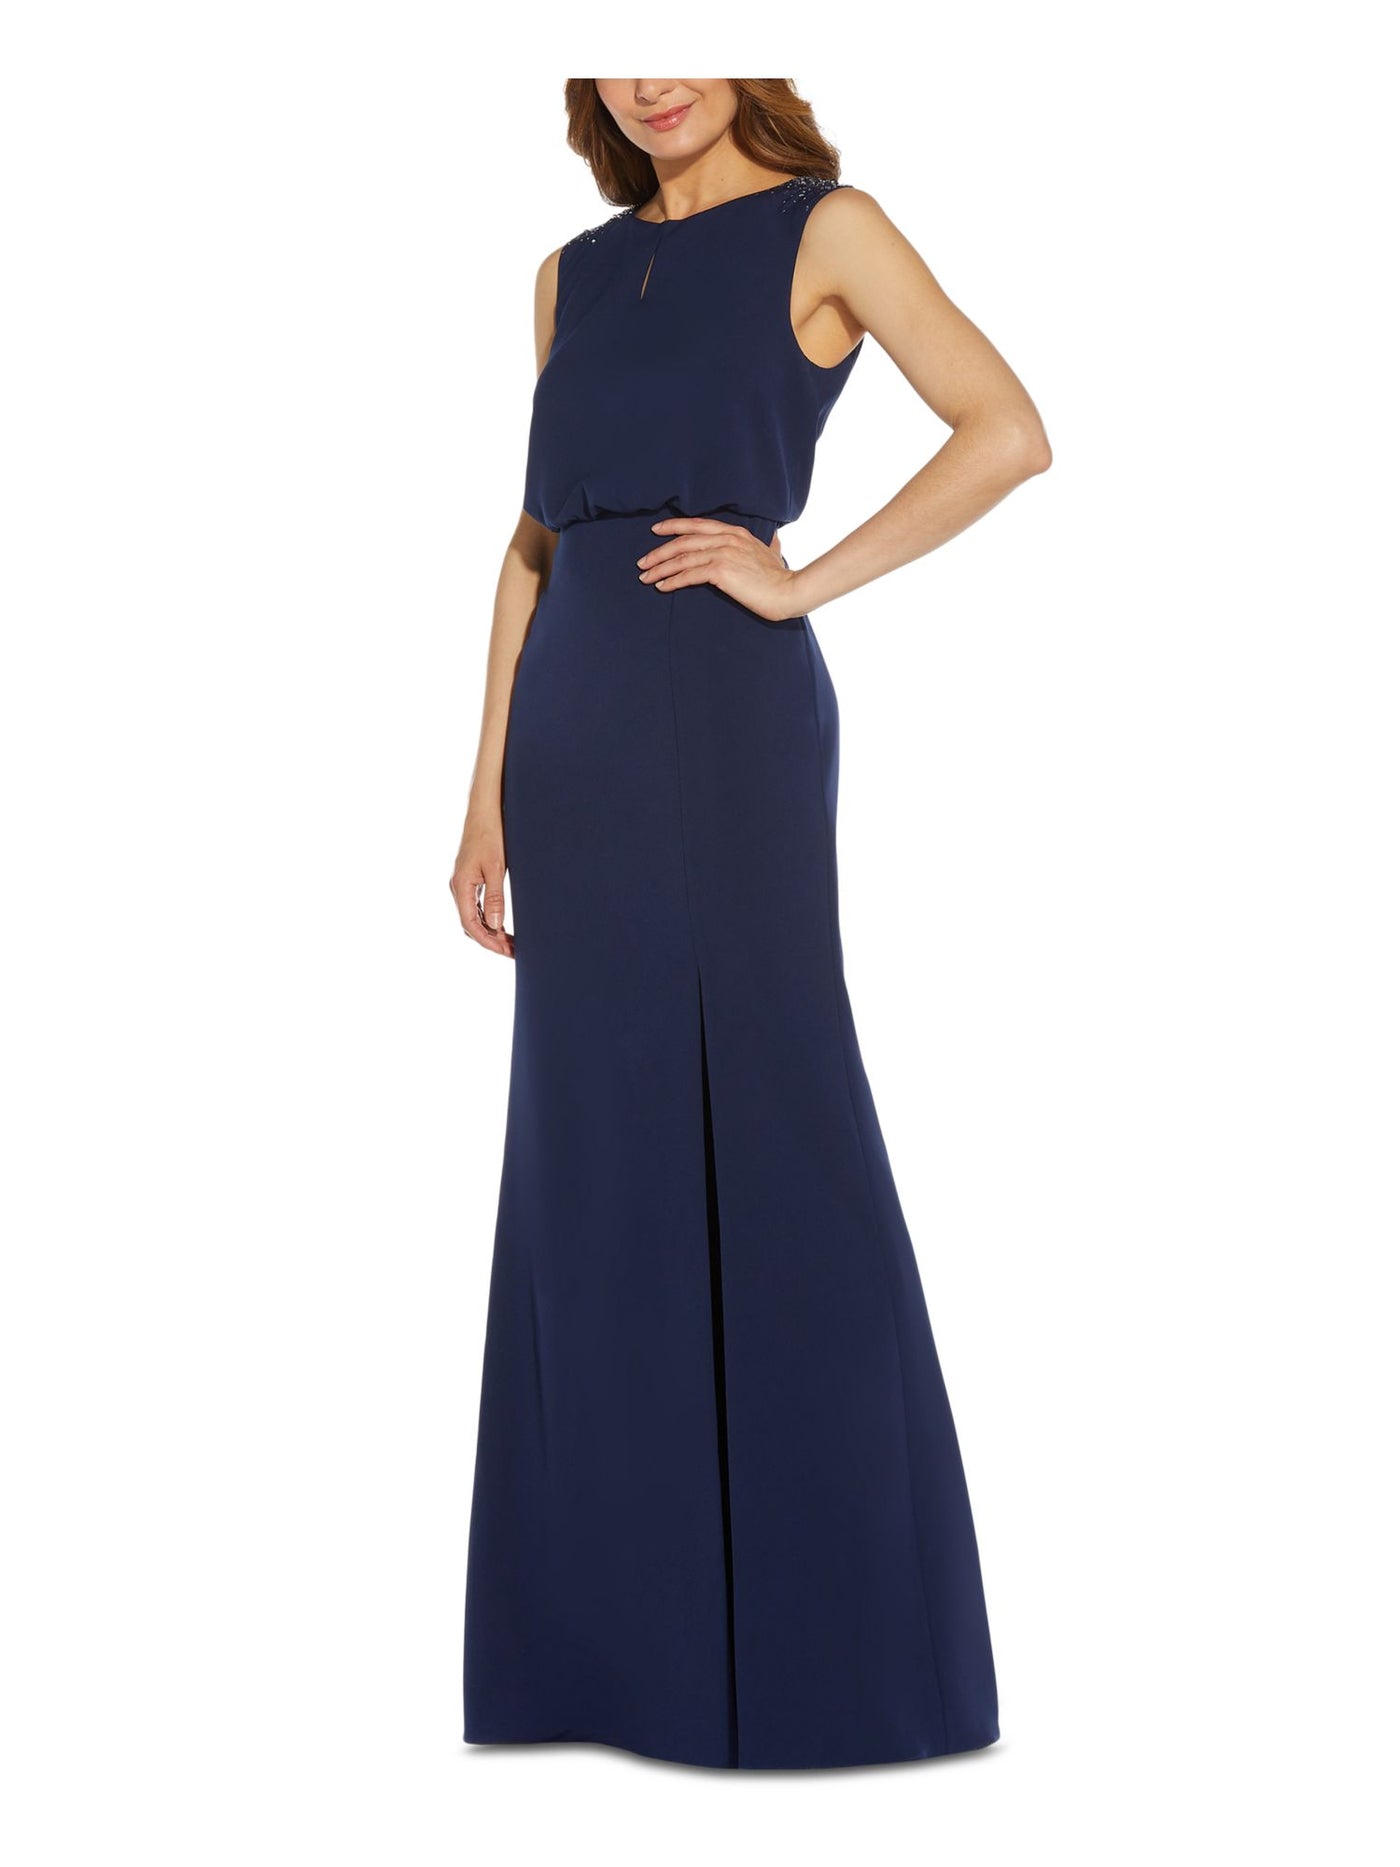 ADRIANNA PAPELL Womens Navy Stretch Embellished Slitted Keyhole Zippered Lined Sleeveless Boat Neck Maxi Formal Blouson Dress 6